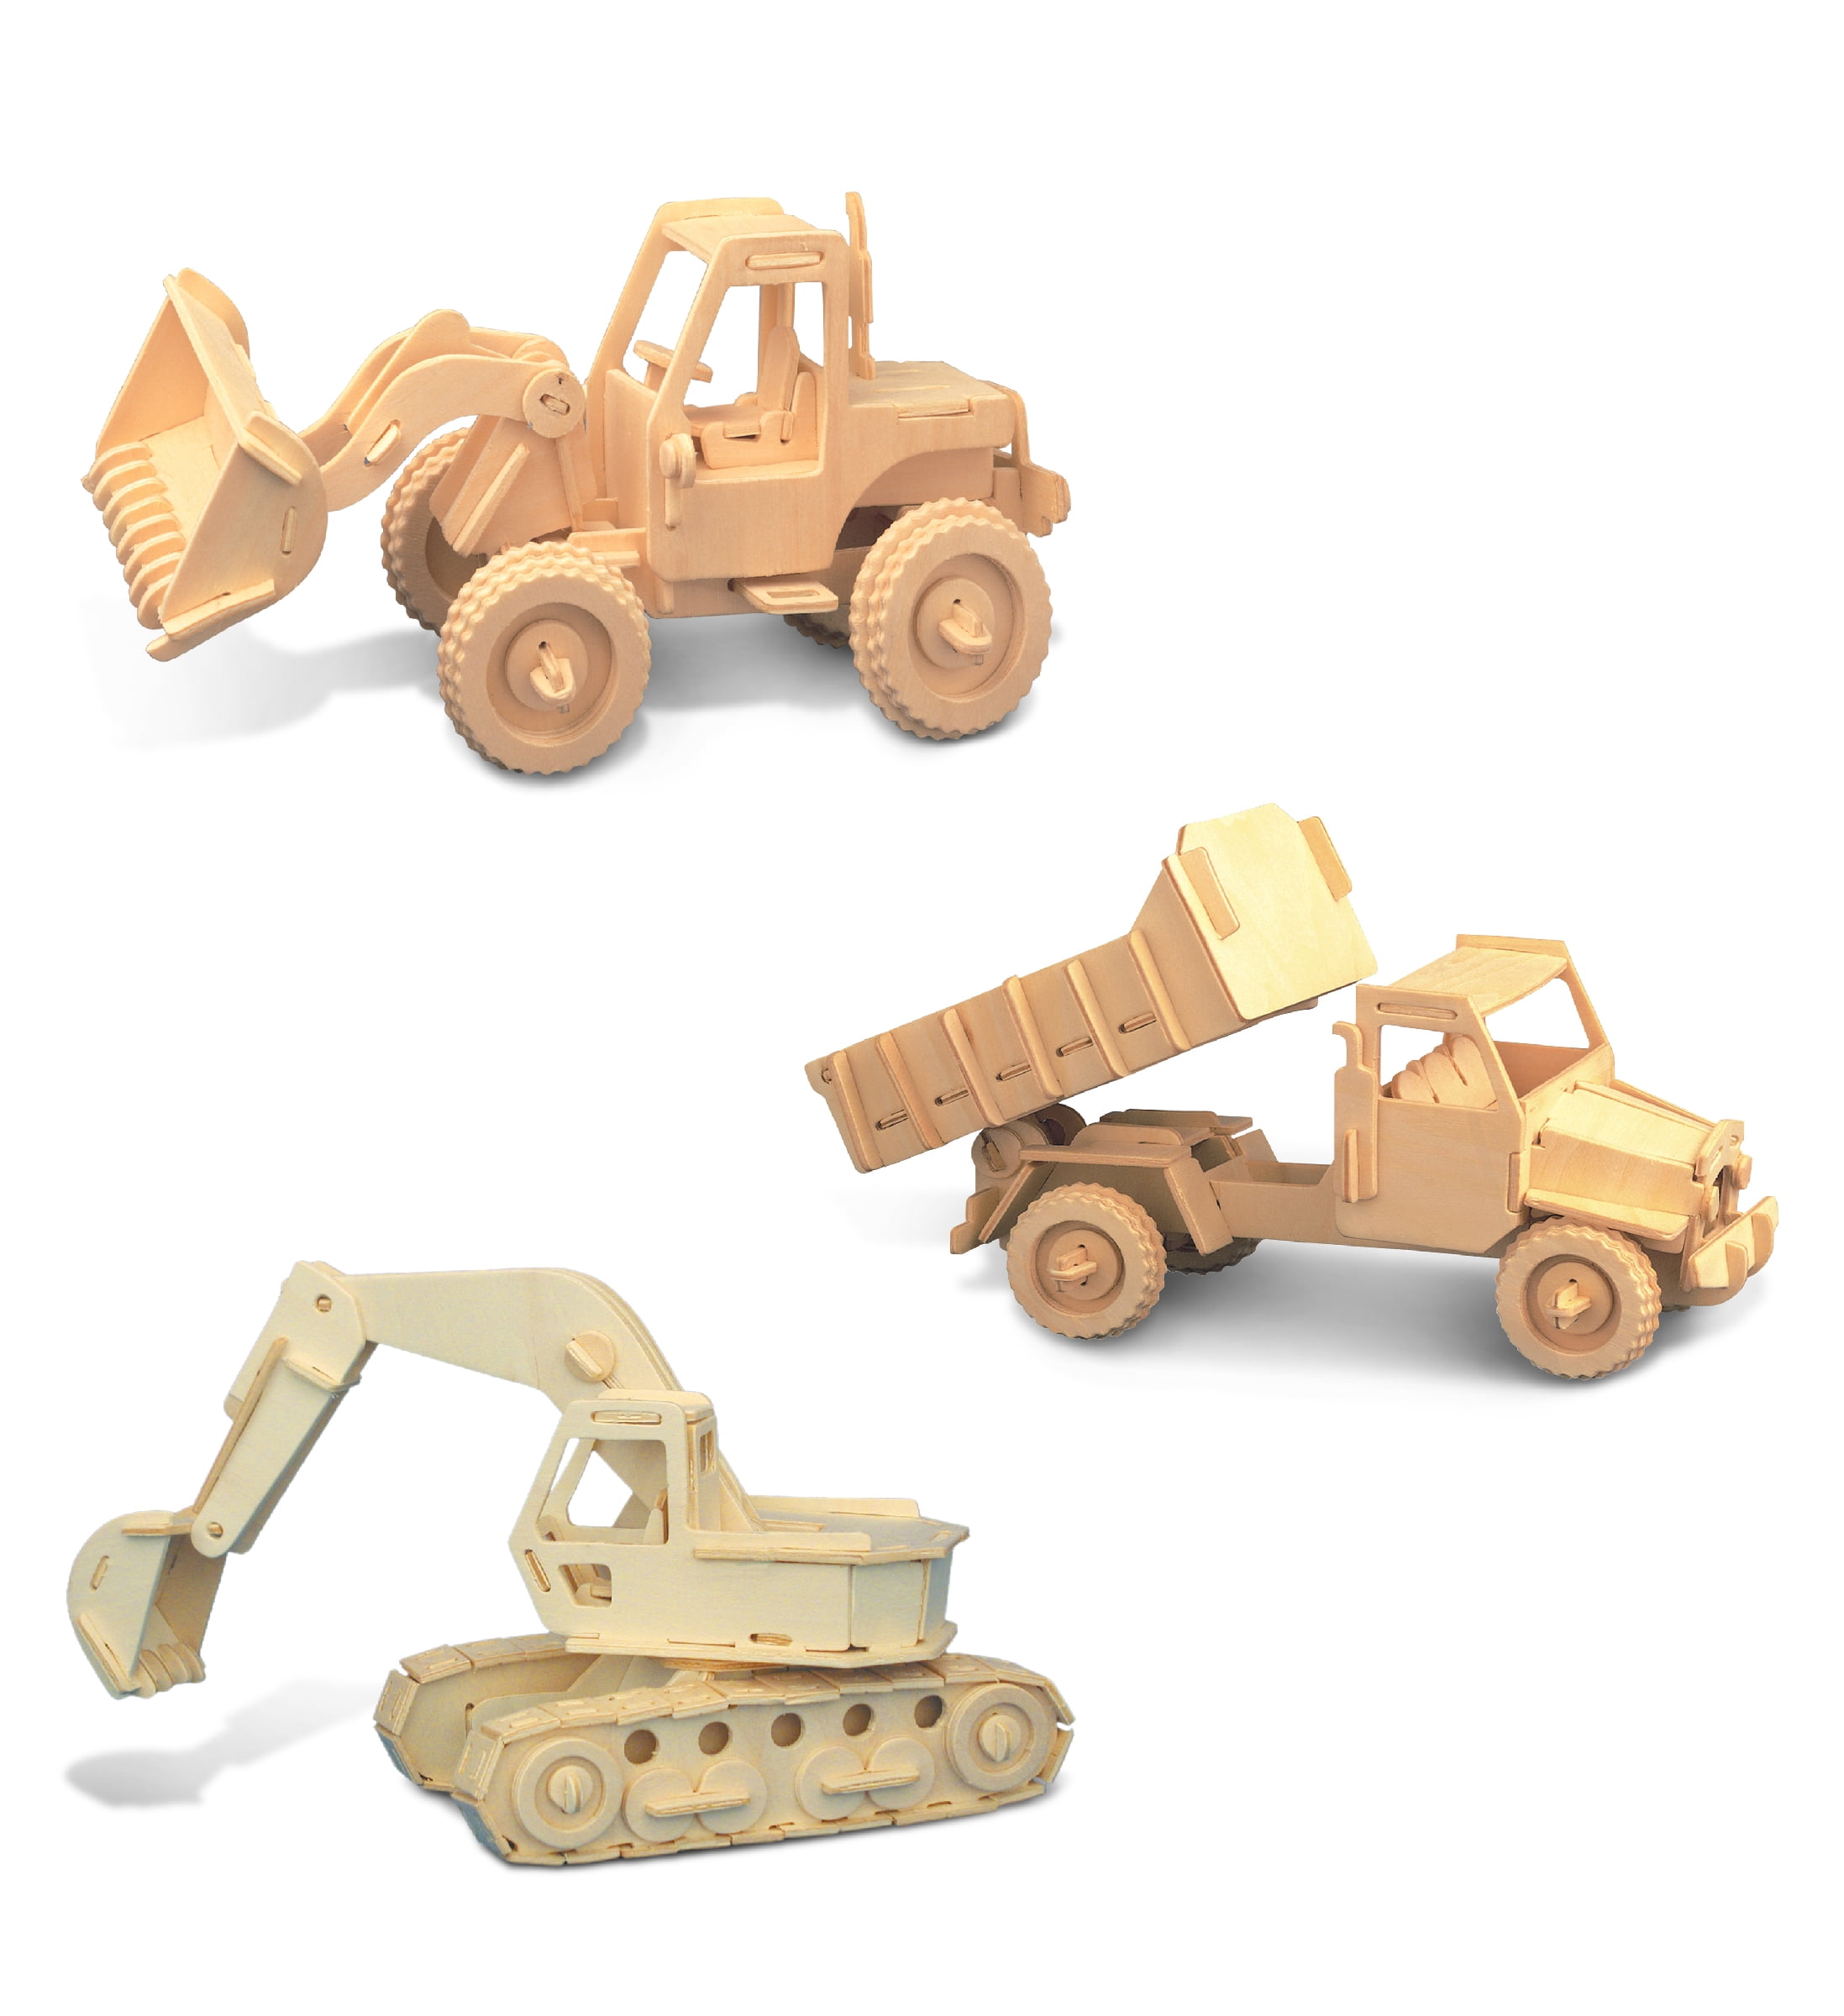 Heave 3D Wooden Puzzle Kits for Adults DIY Building Models Wood Craft Toy Gifts for Kids Boys and Girls Motorcycle##